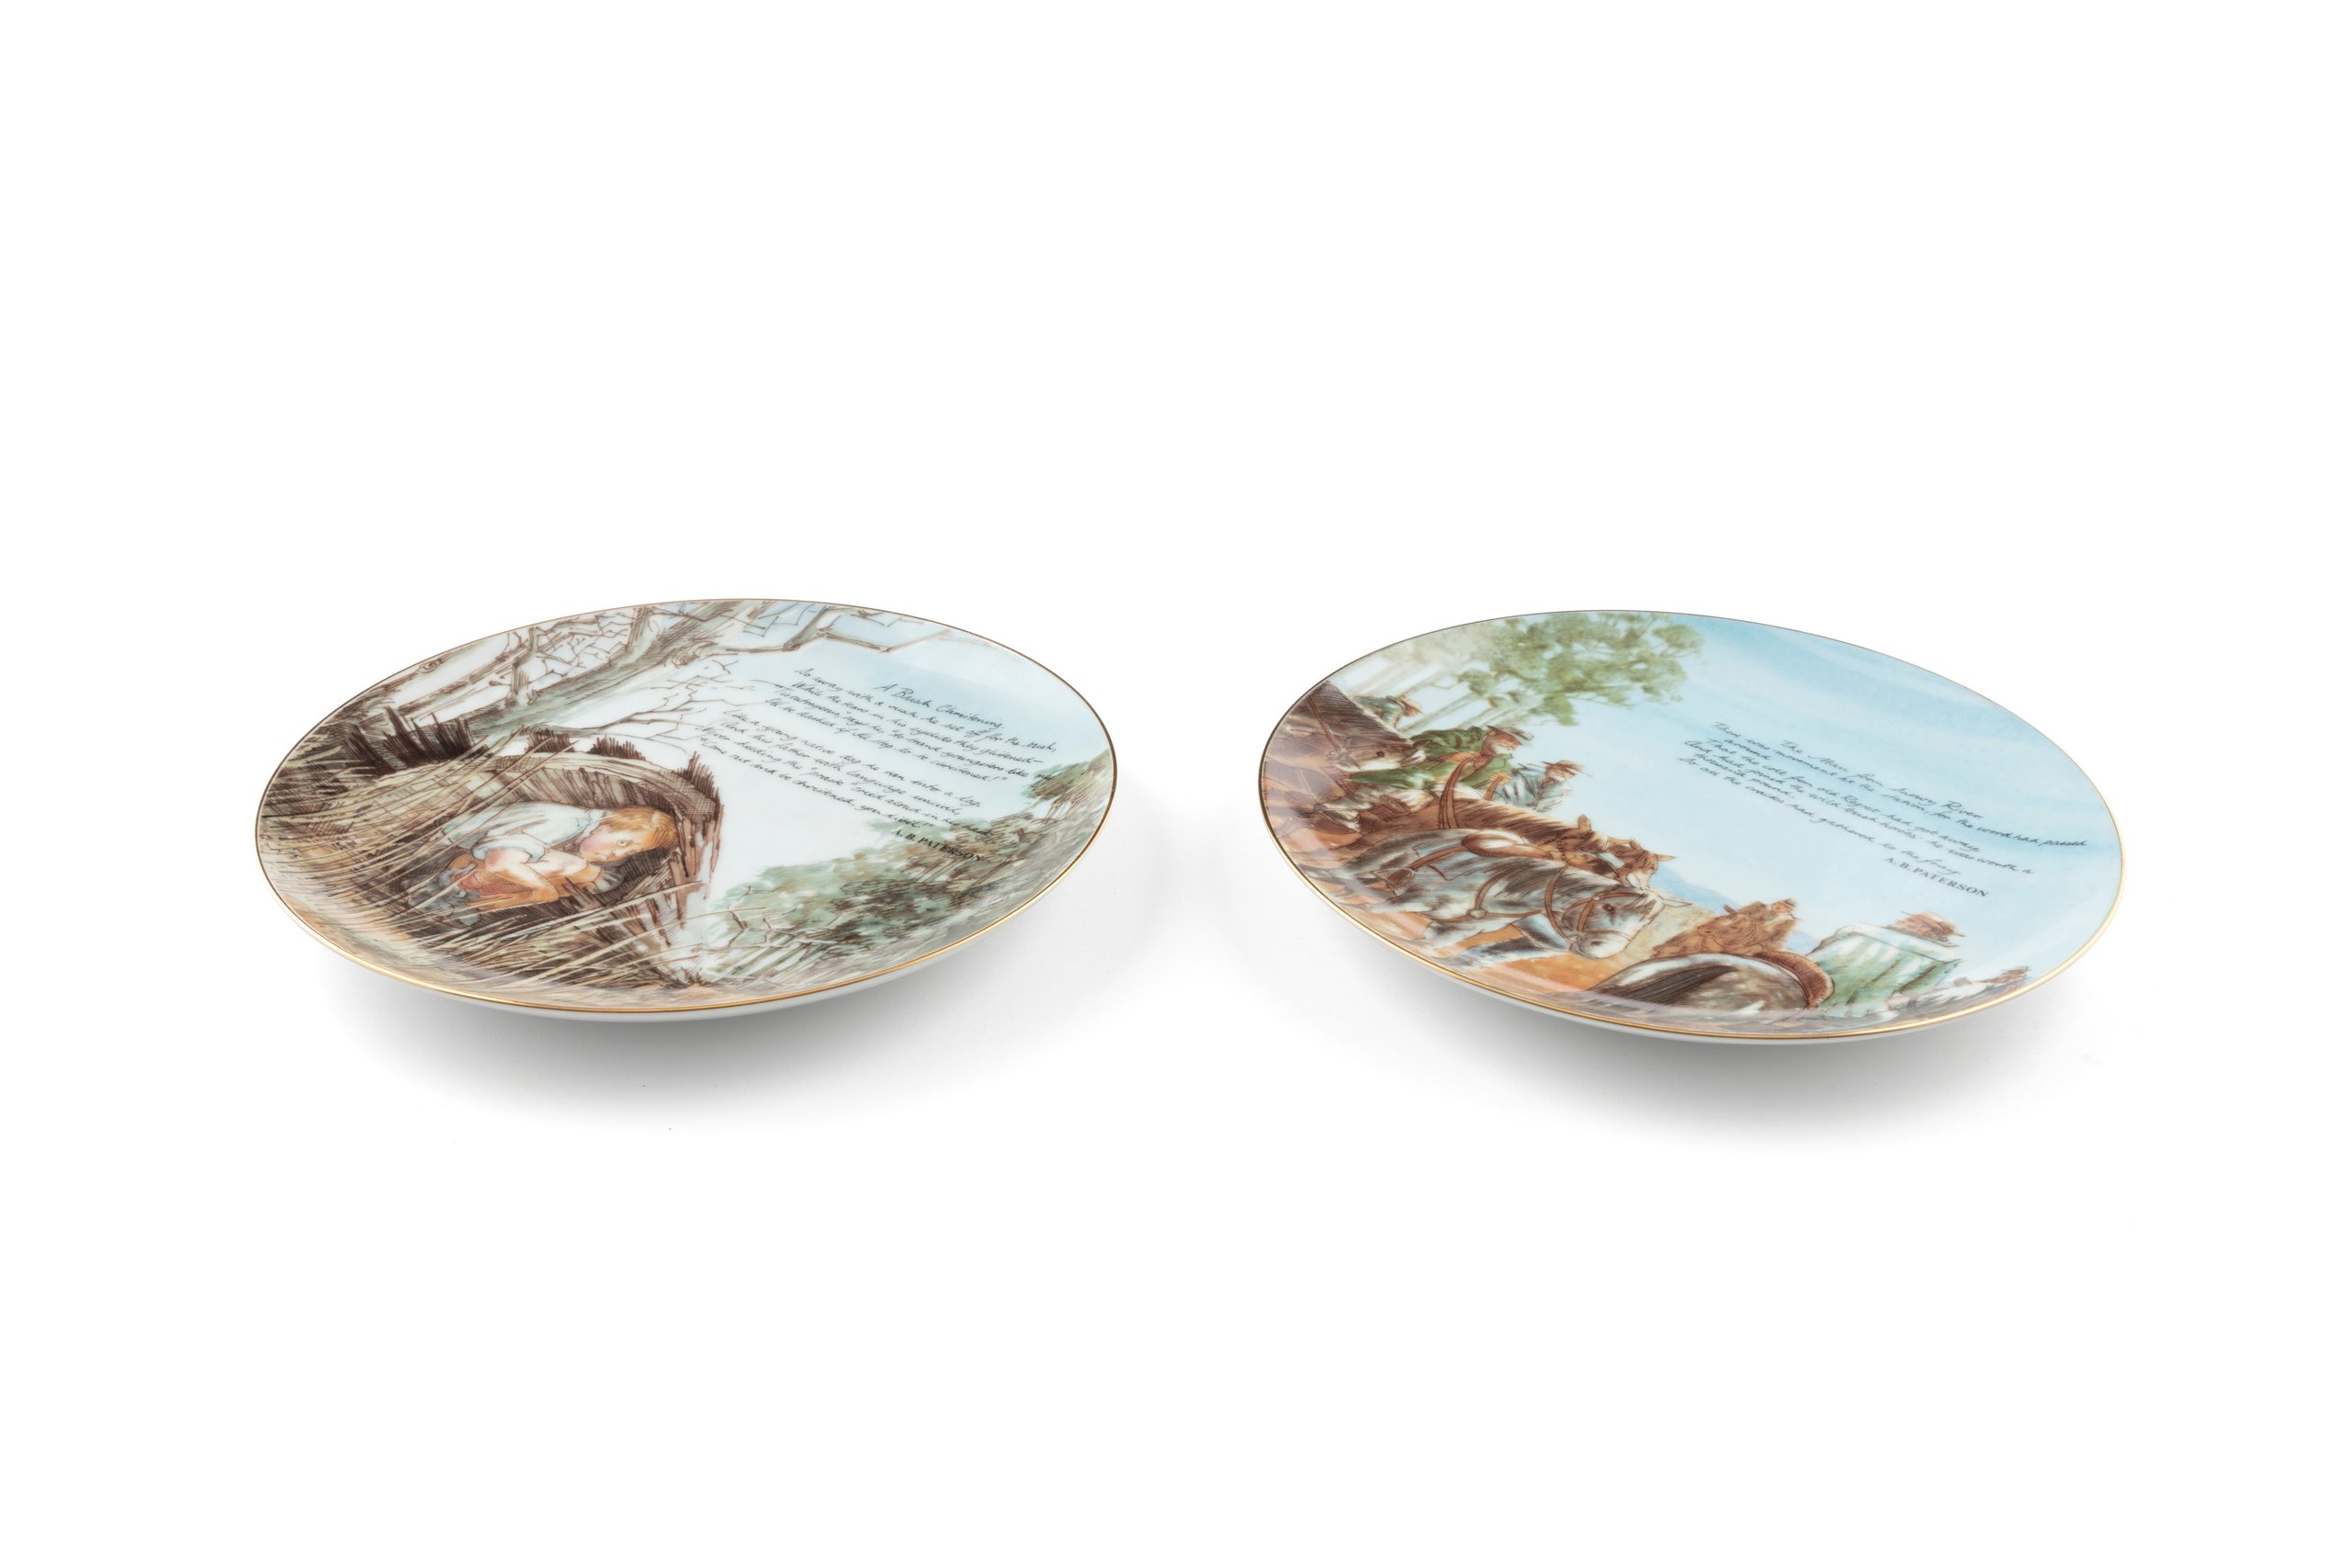 Set of six plates with Banjo Paterson designs